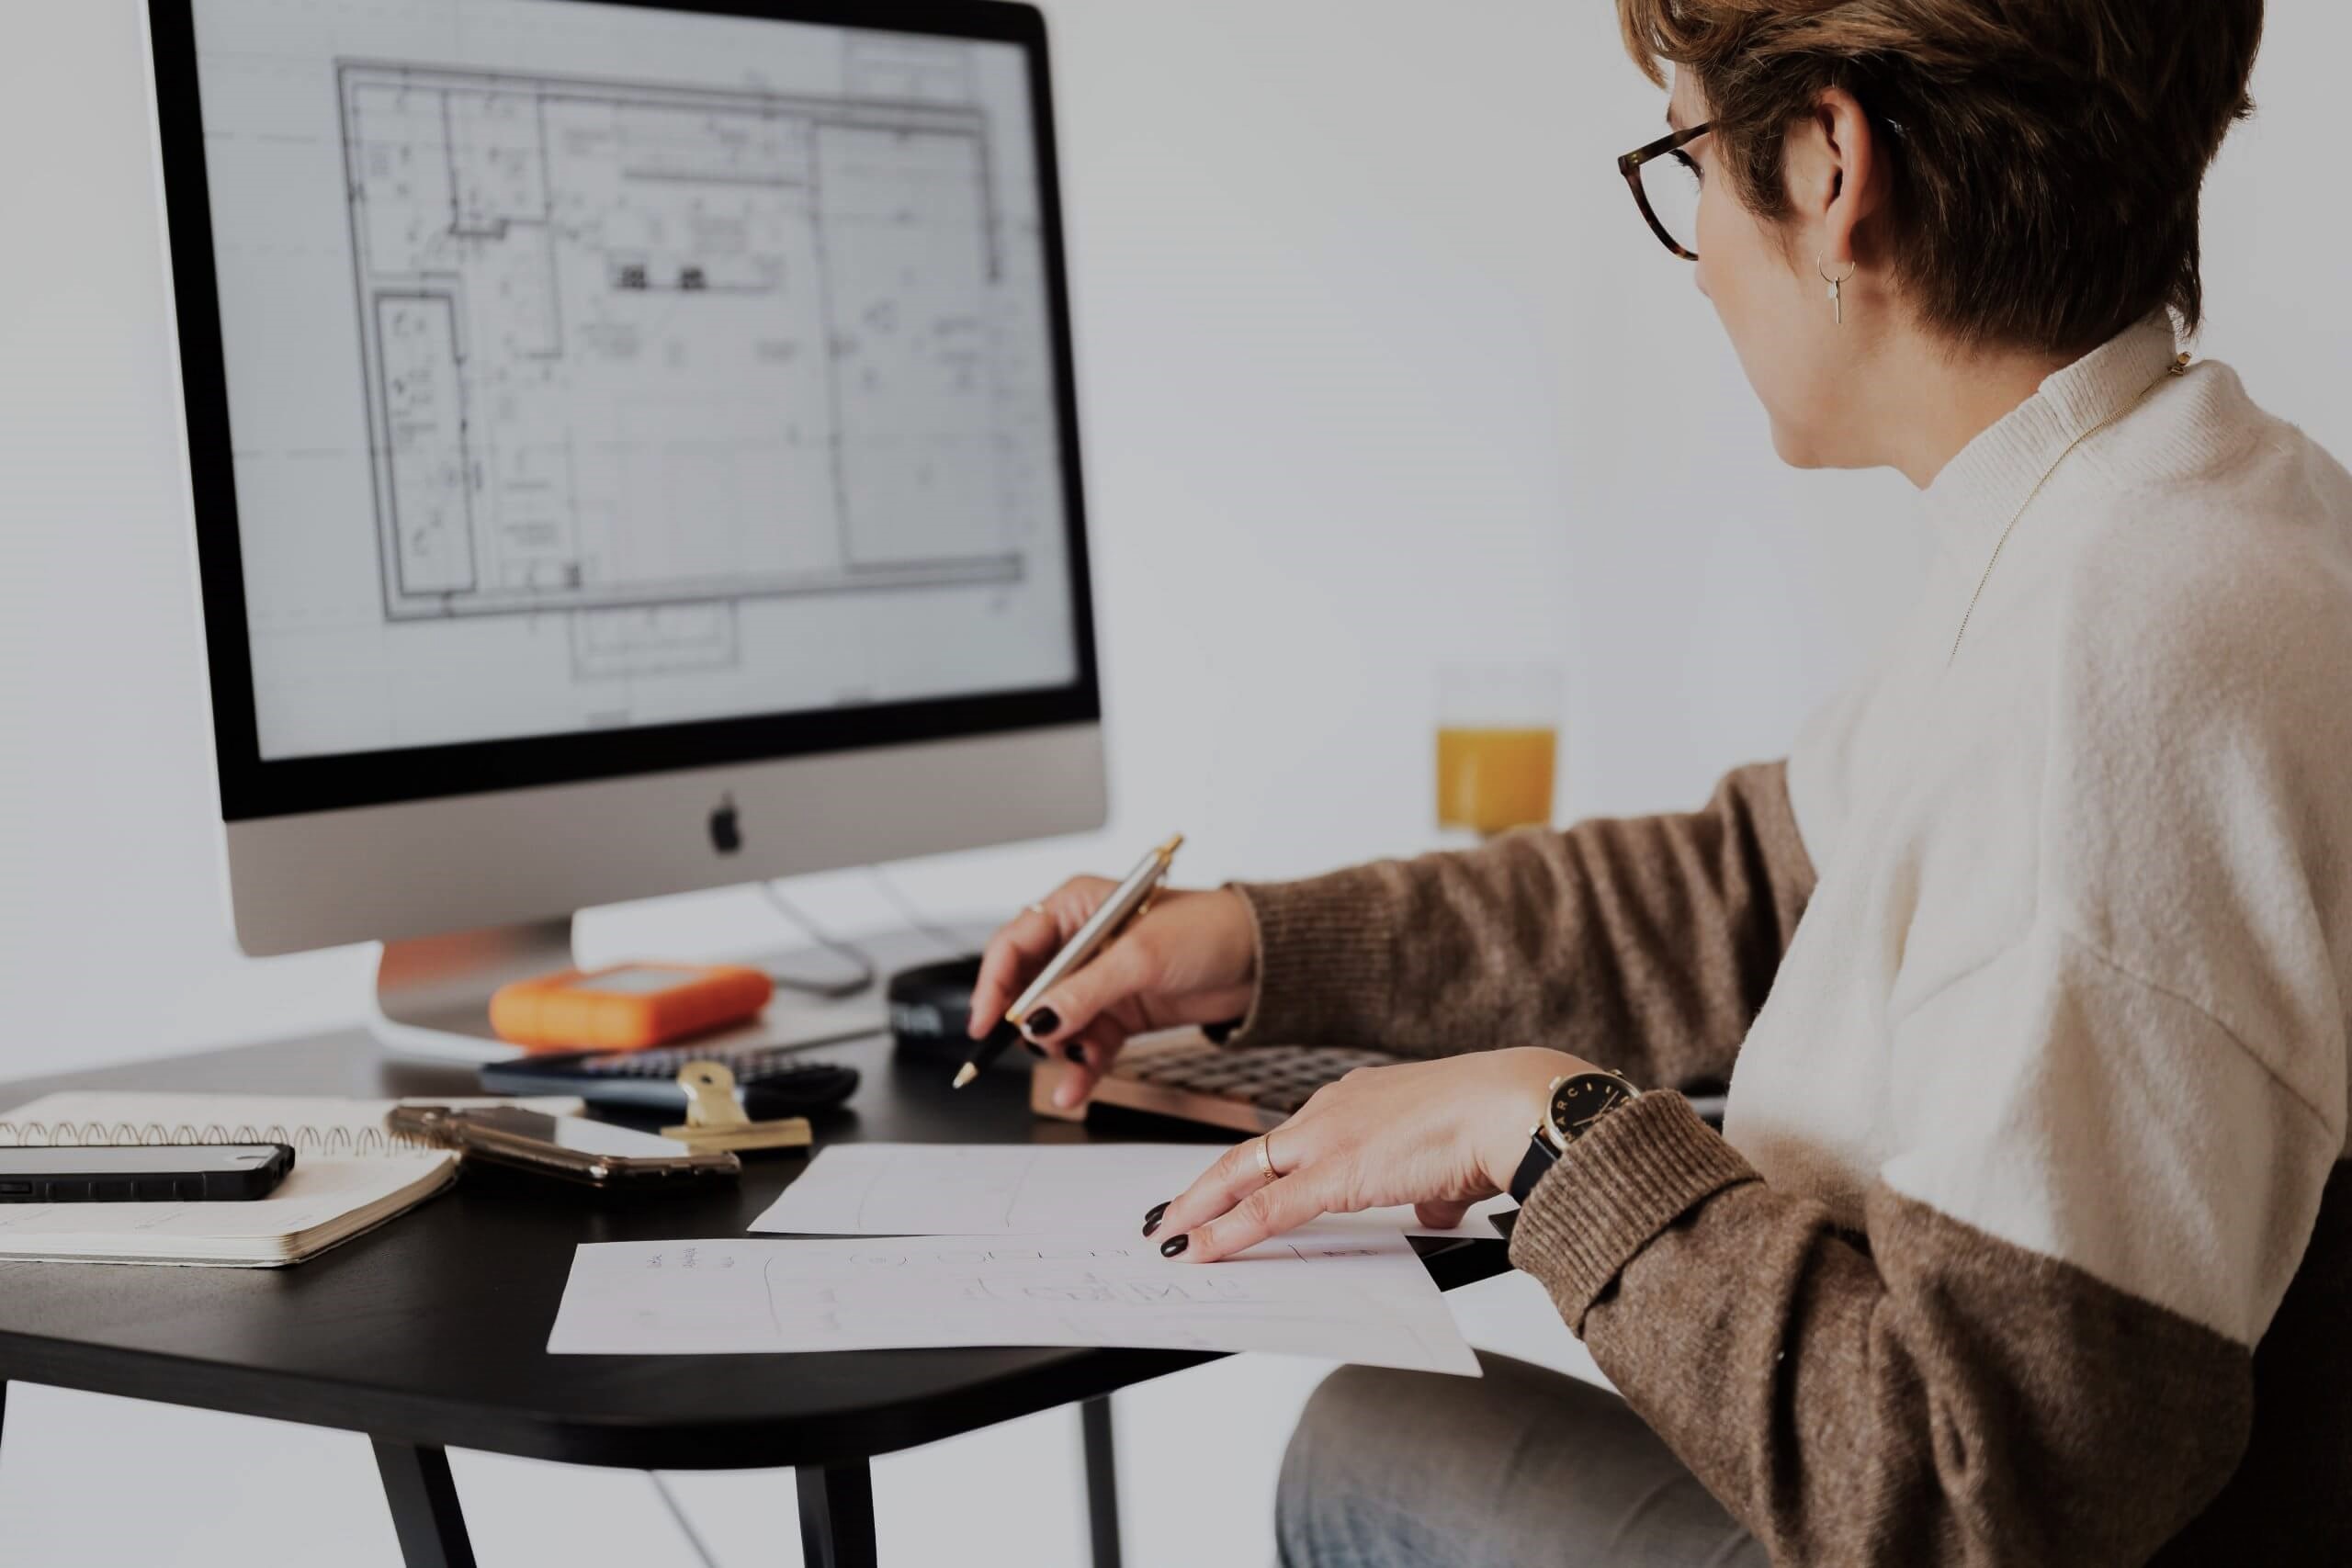 Woman sitting in front of computer, looking at blueprints